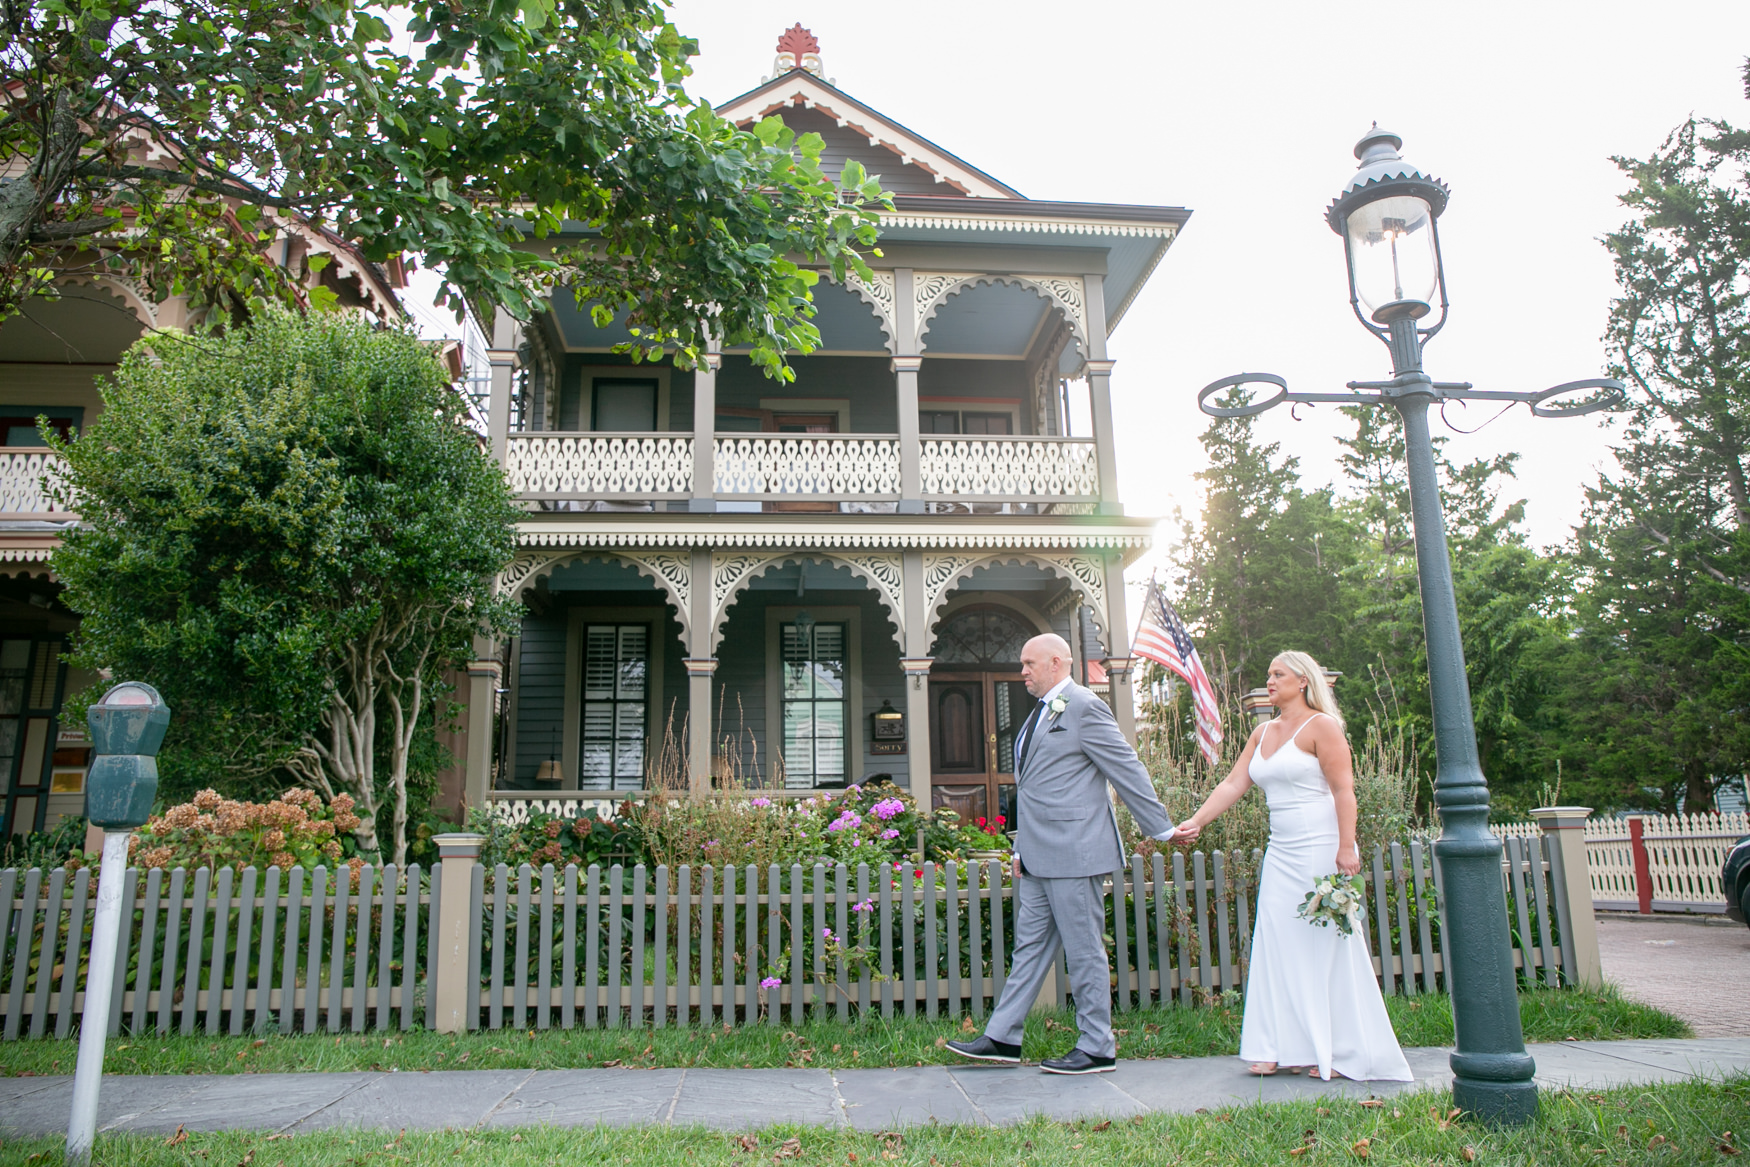 Cape May bed and breakfast wedding